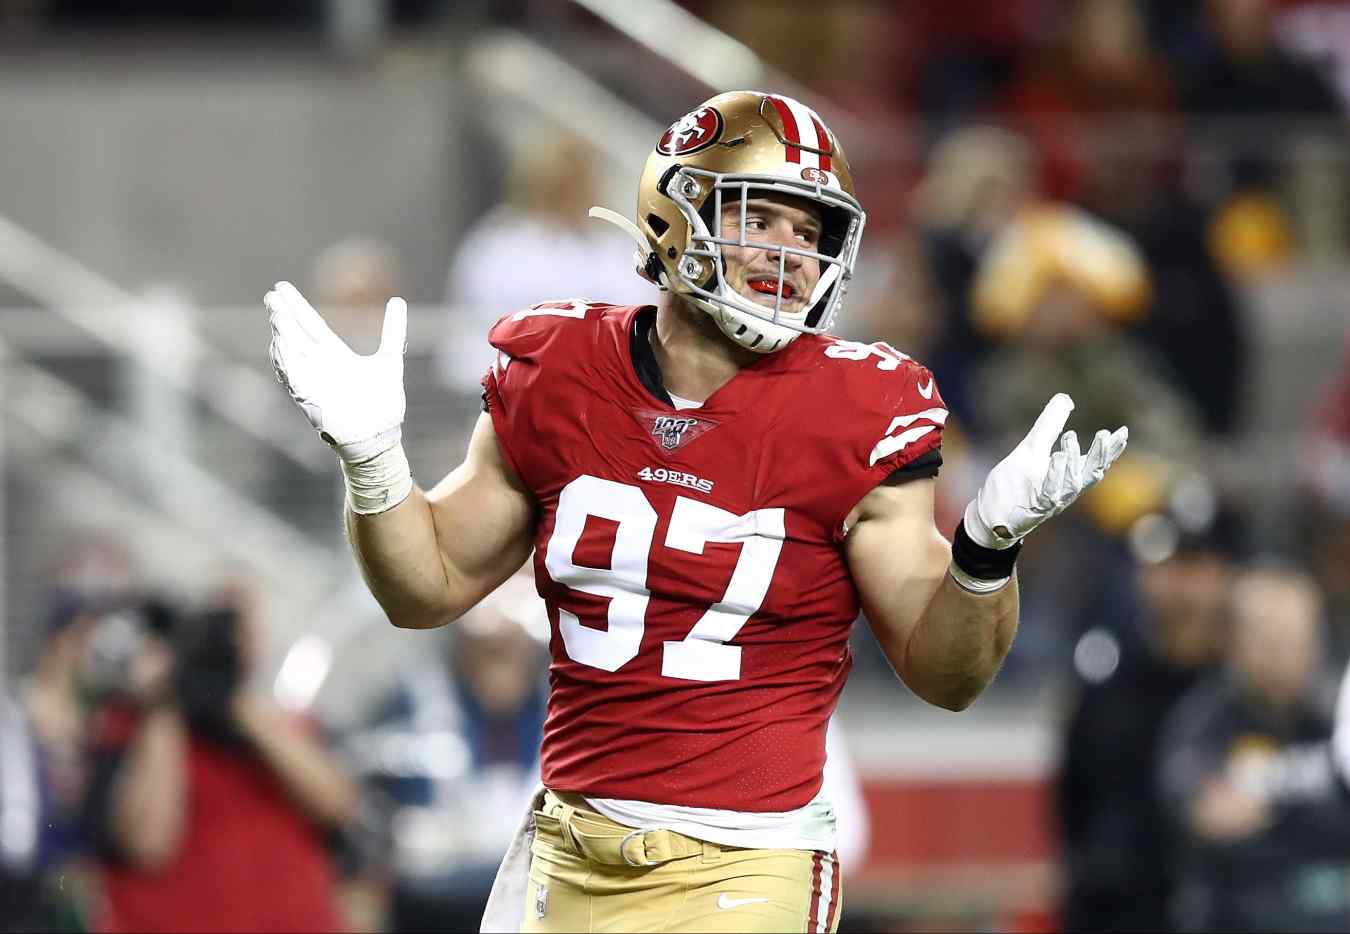 Nick Bosa Contract How Much Money Does 49ers DE Make?